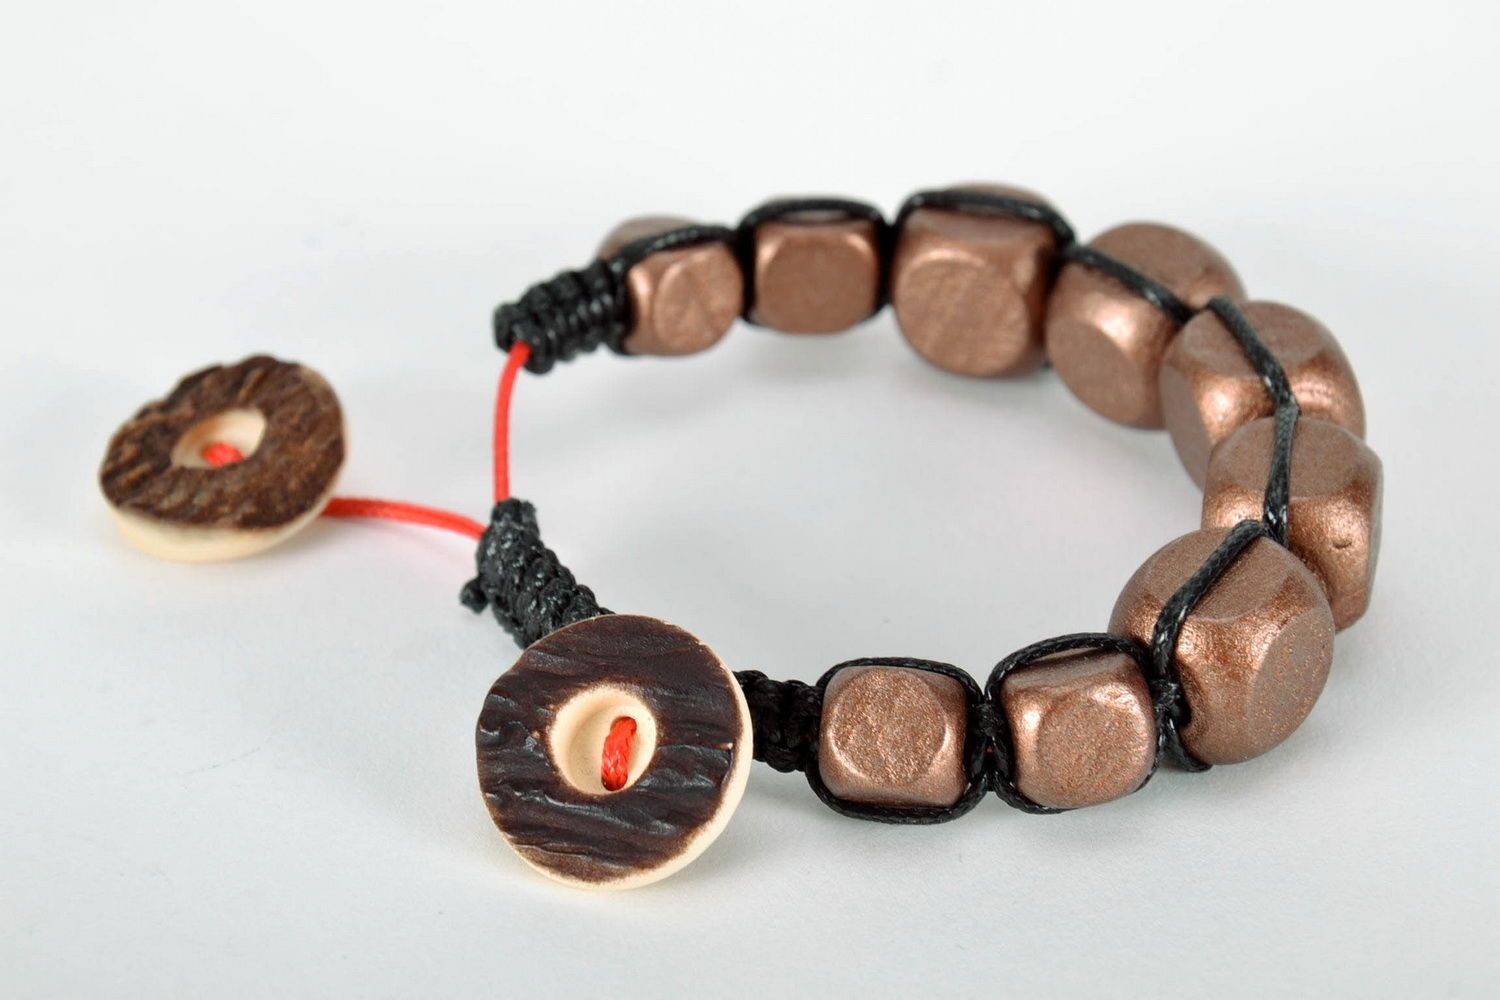 Bracelet made of wooden beads and plastic buttons photo 4